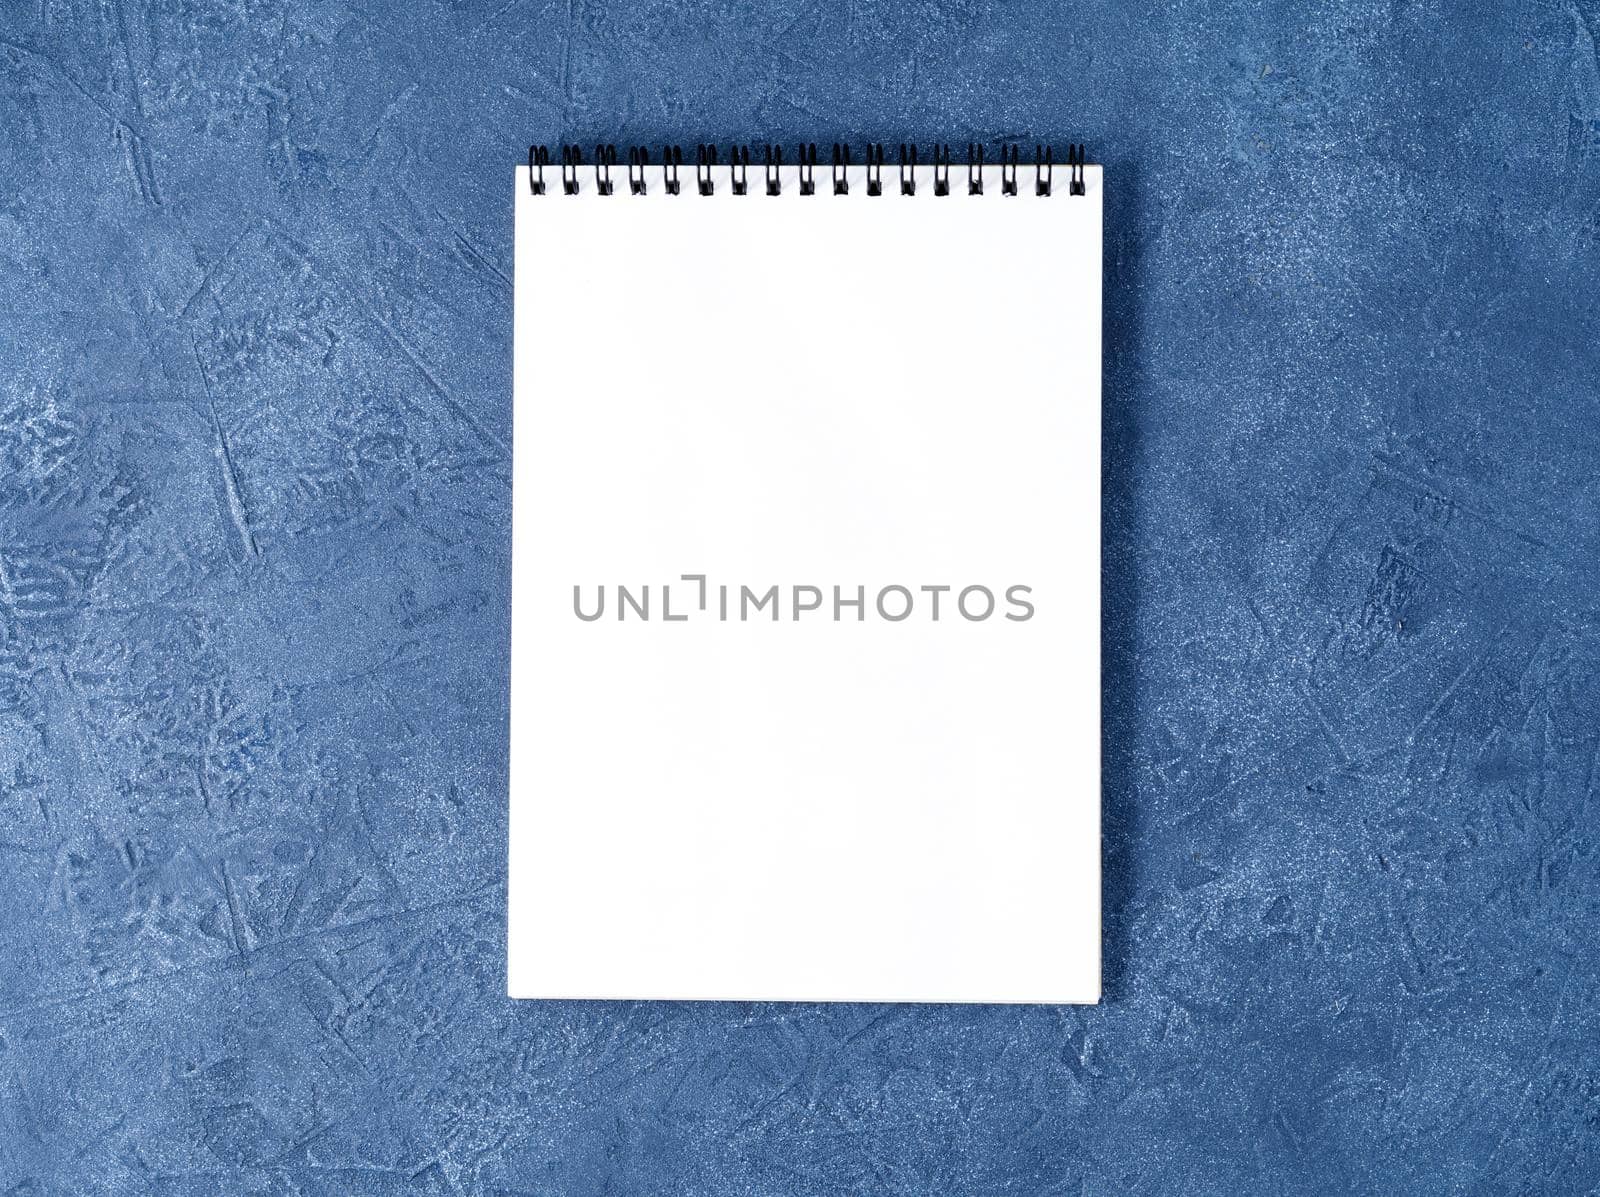 The open notepad with clean white page on a aged dark blue stone table, top view